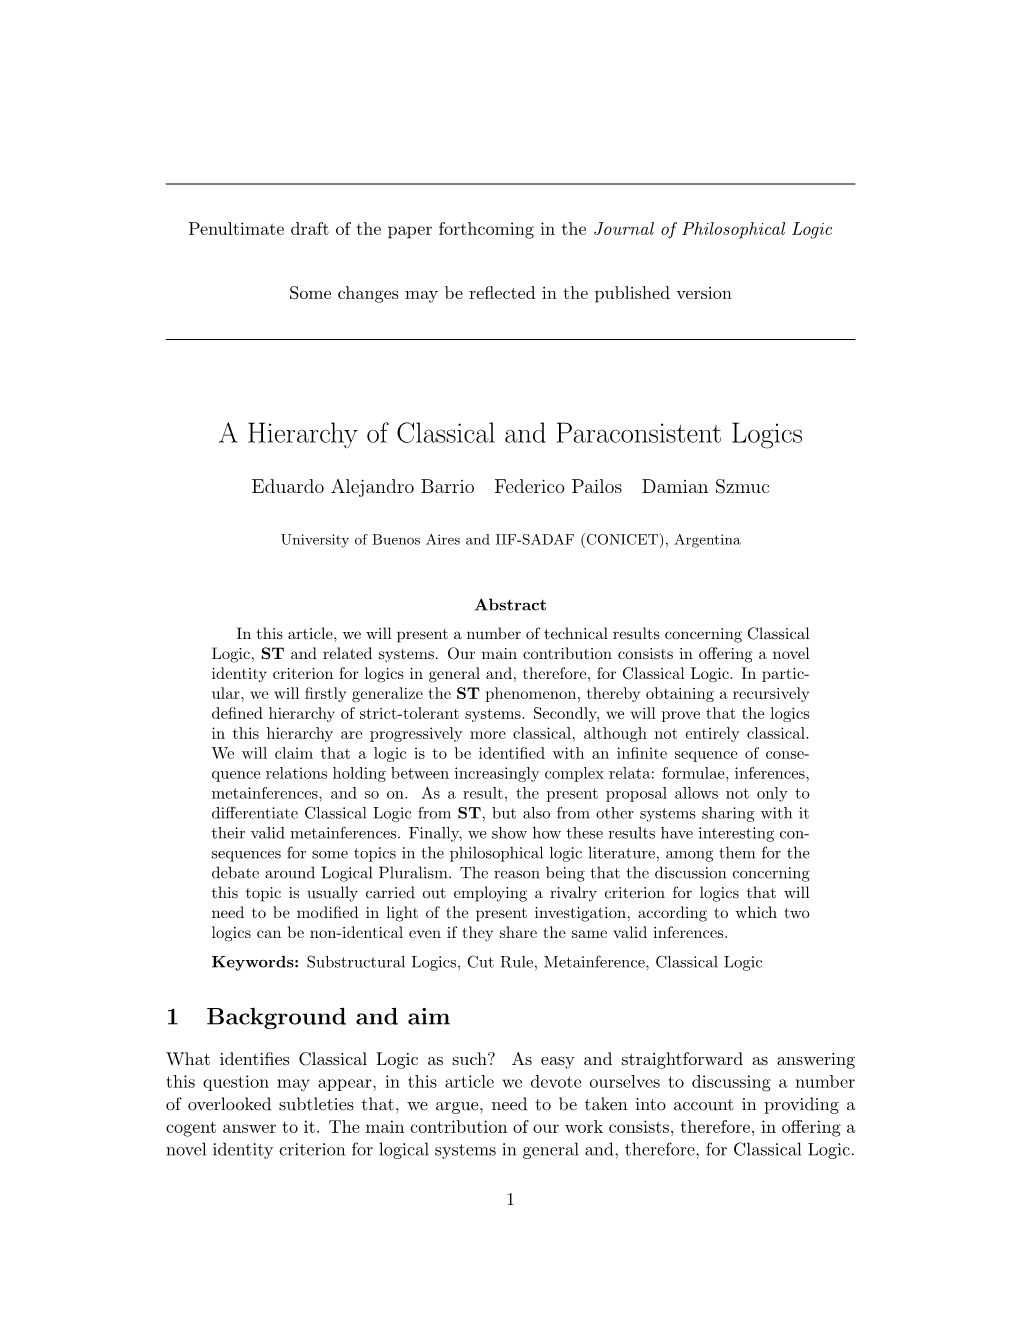 A Hierarchy of Classical and Paraconsistent Logics